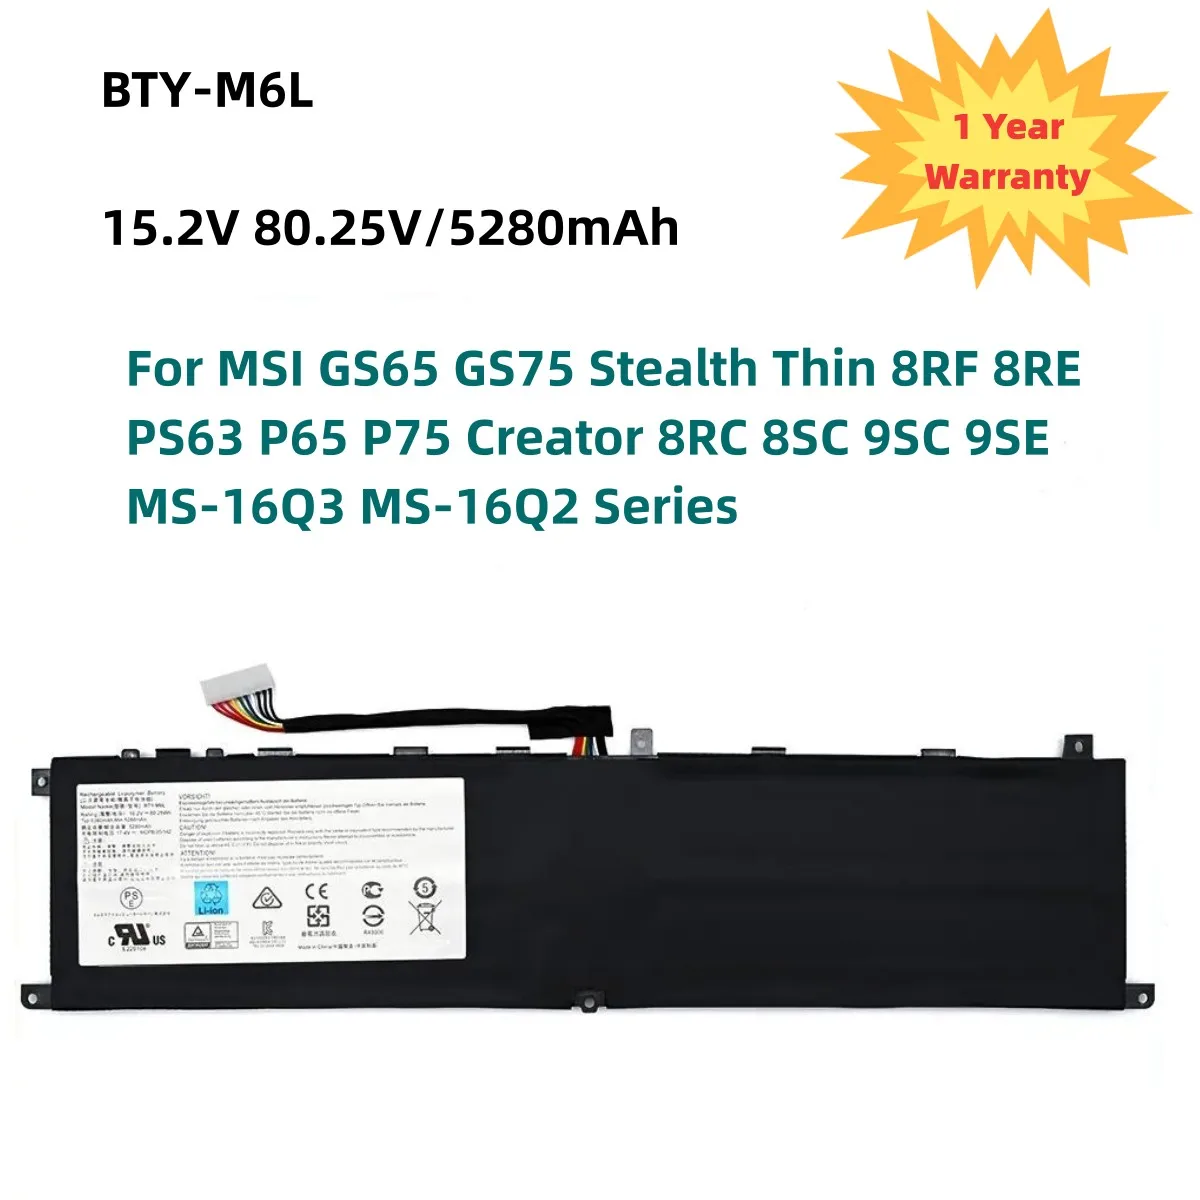 

15.2V 80.25WH BTY-M6L Battery For MSI GS65 GS75 Stealth Thin 8RF 8RE PS63 P65 P75 Creator 8RC 8SC 9SC 9SE MS-16Q3 MS-16Q2 Series